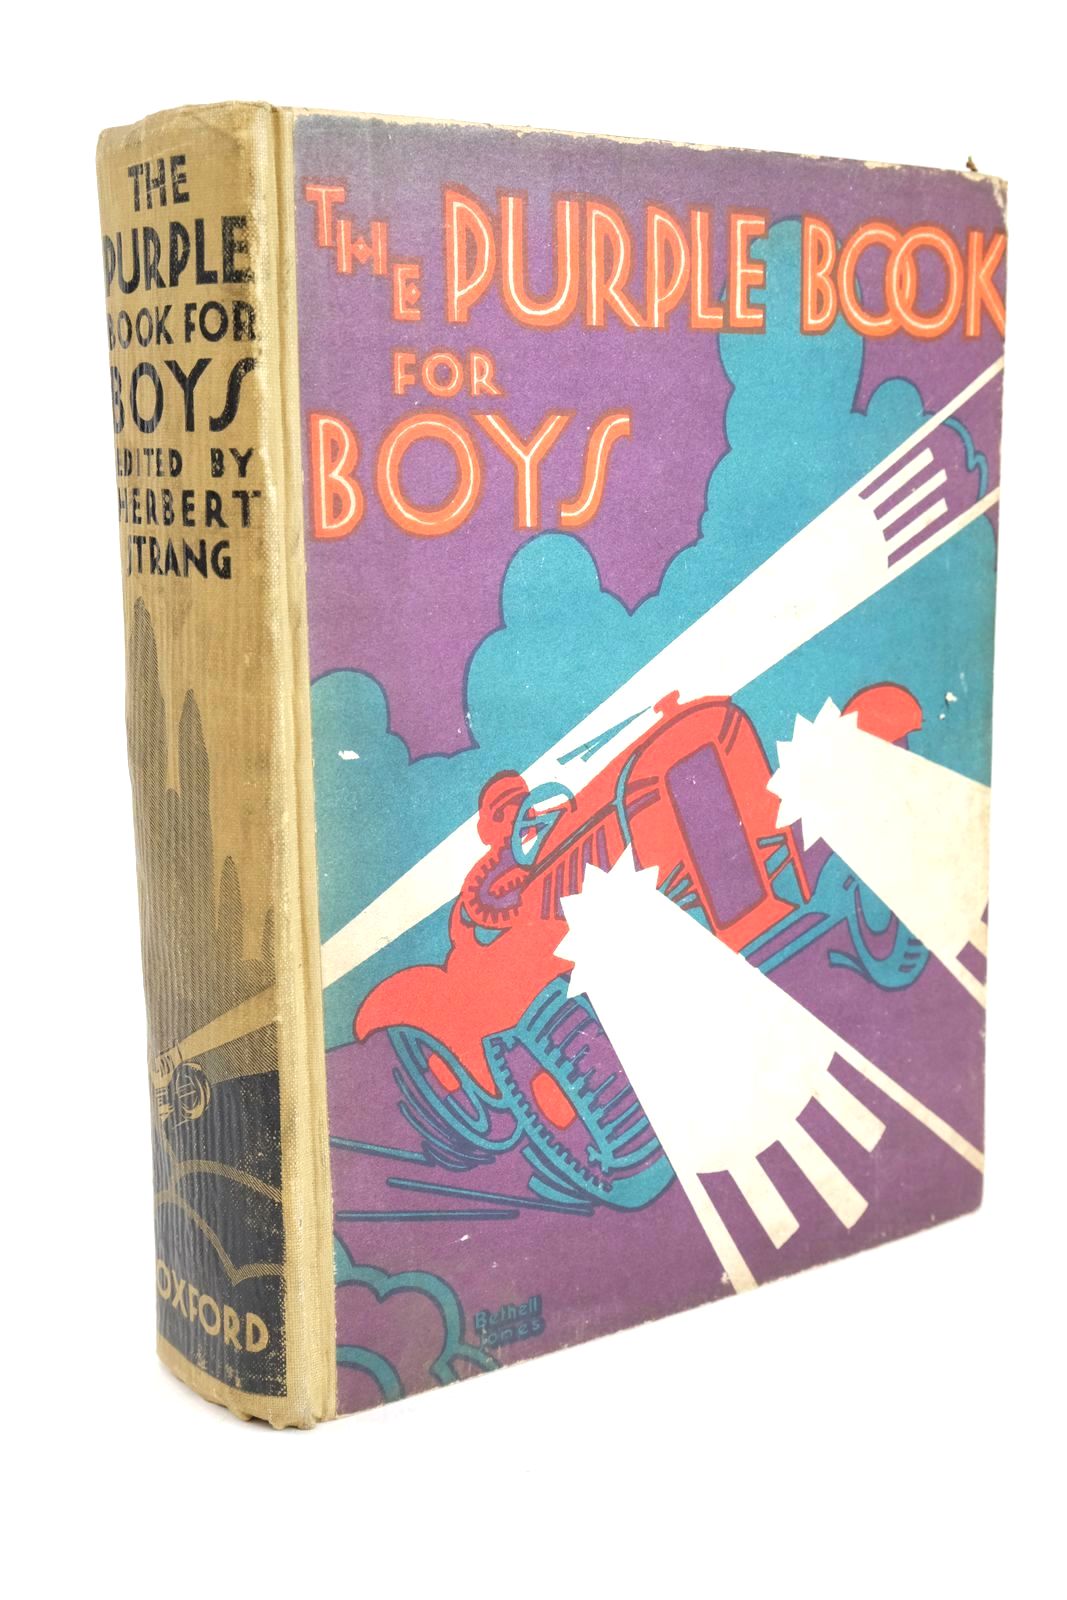 Photo of THE PURPLE BOOK FOR BOYS- Stock Number: 1325452